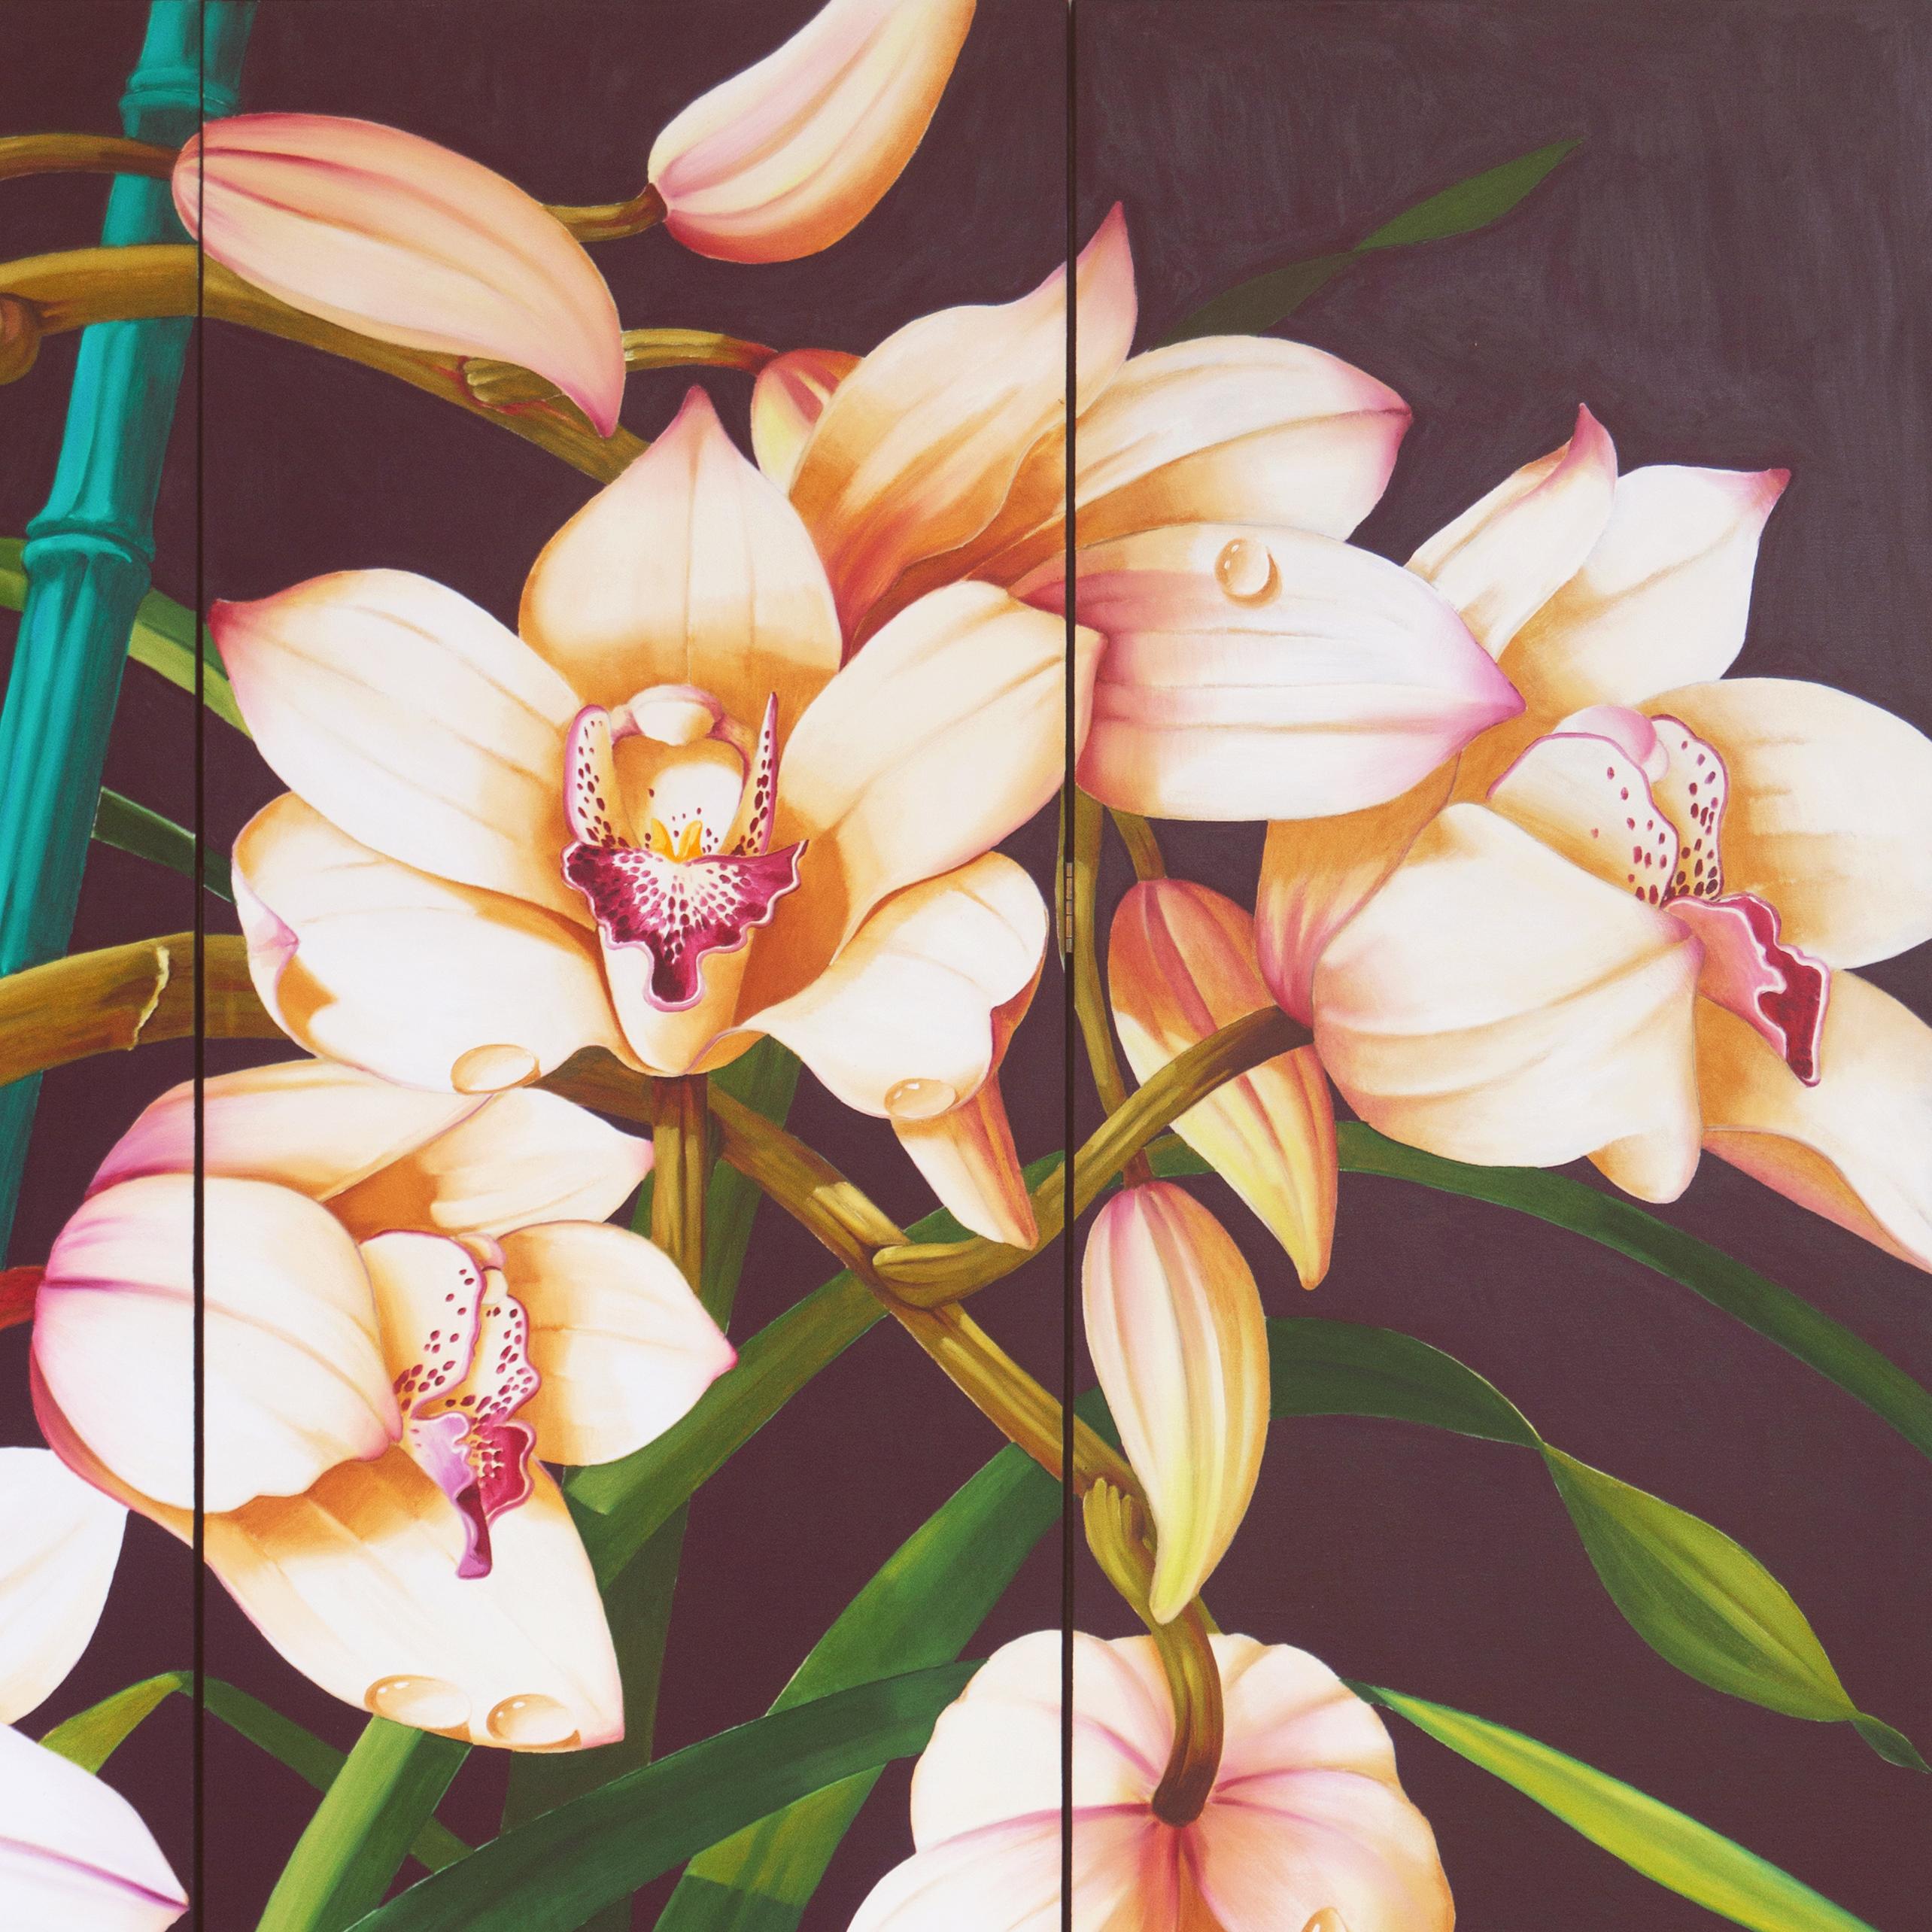  'Cymbidium Orchids', Large Four-Panel Screen, Paris, Basel, Smithsonian Museum - Realist Painting by Charley Brown